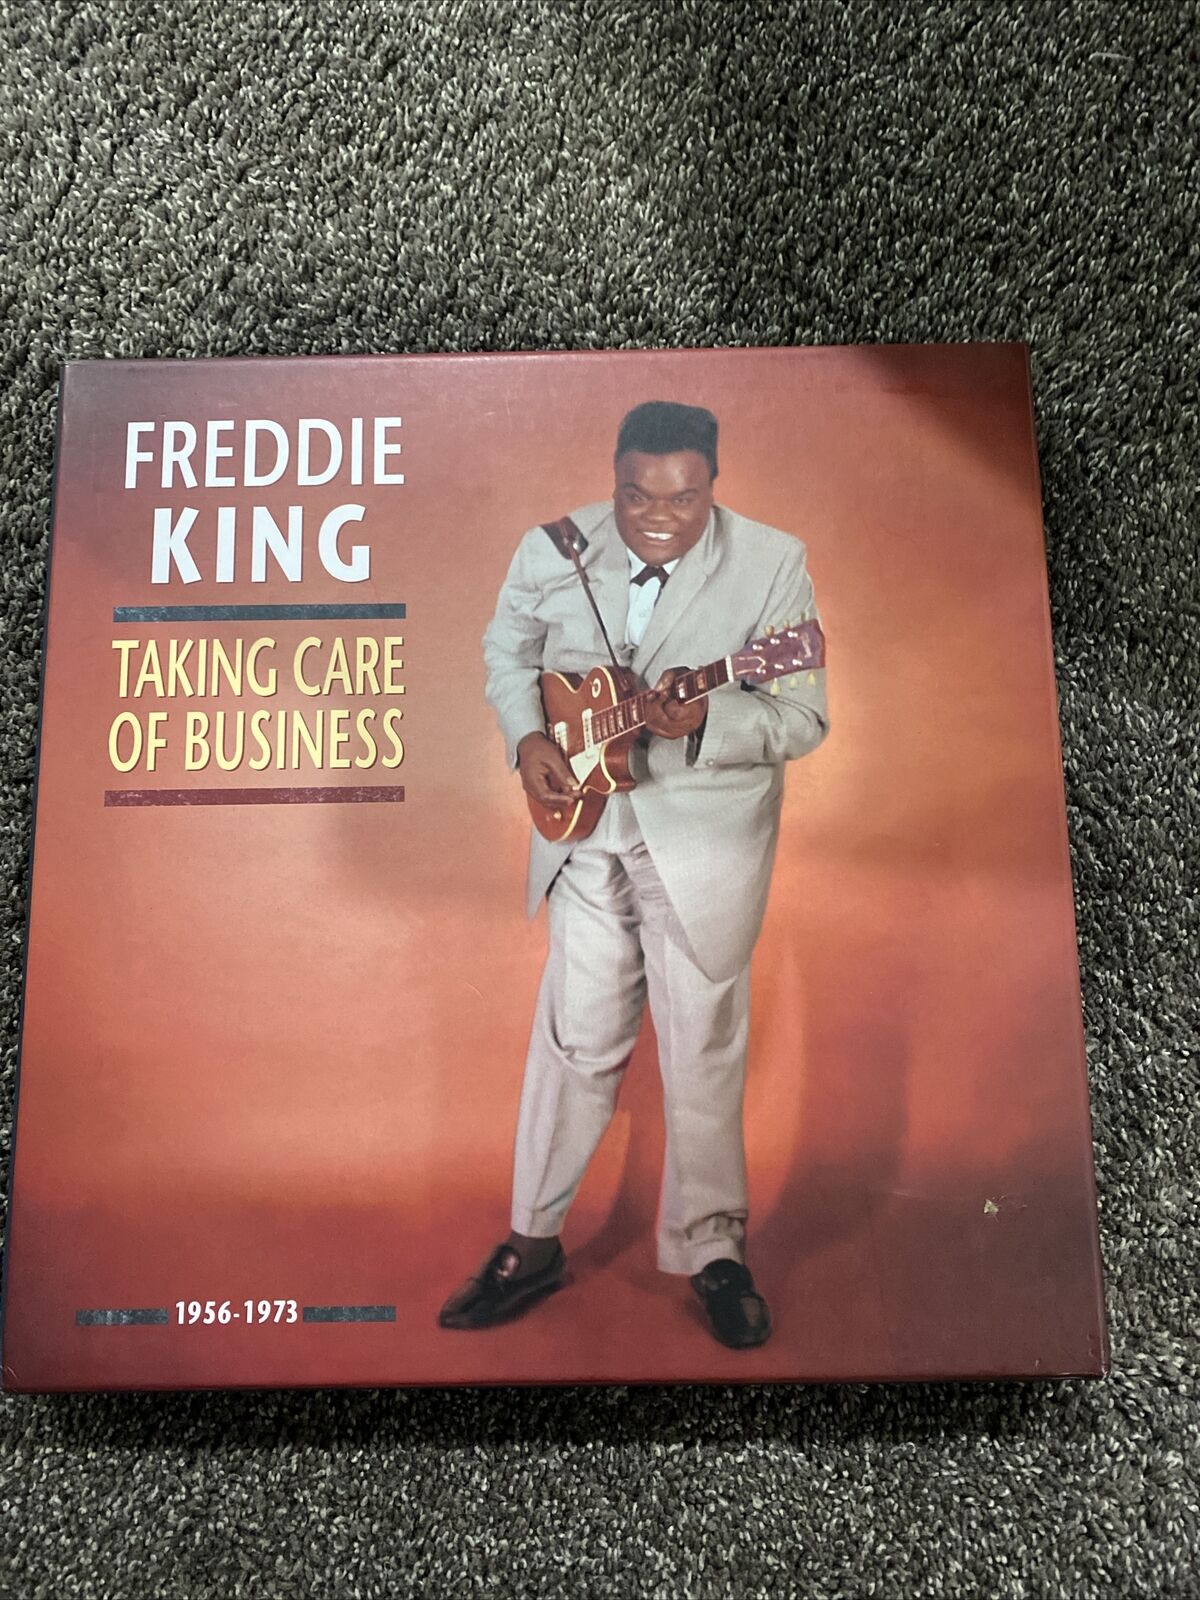 Taking Care of Business [Box Set Edition] [Box] by Freddie King 